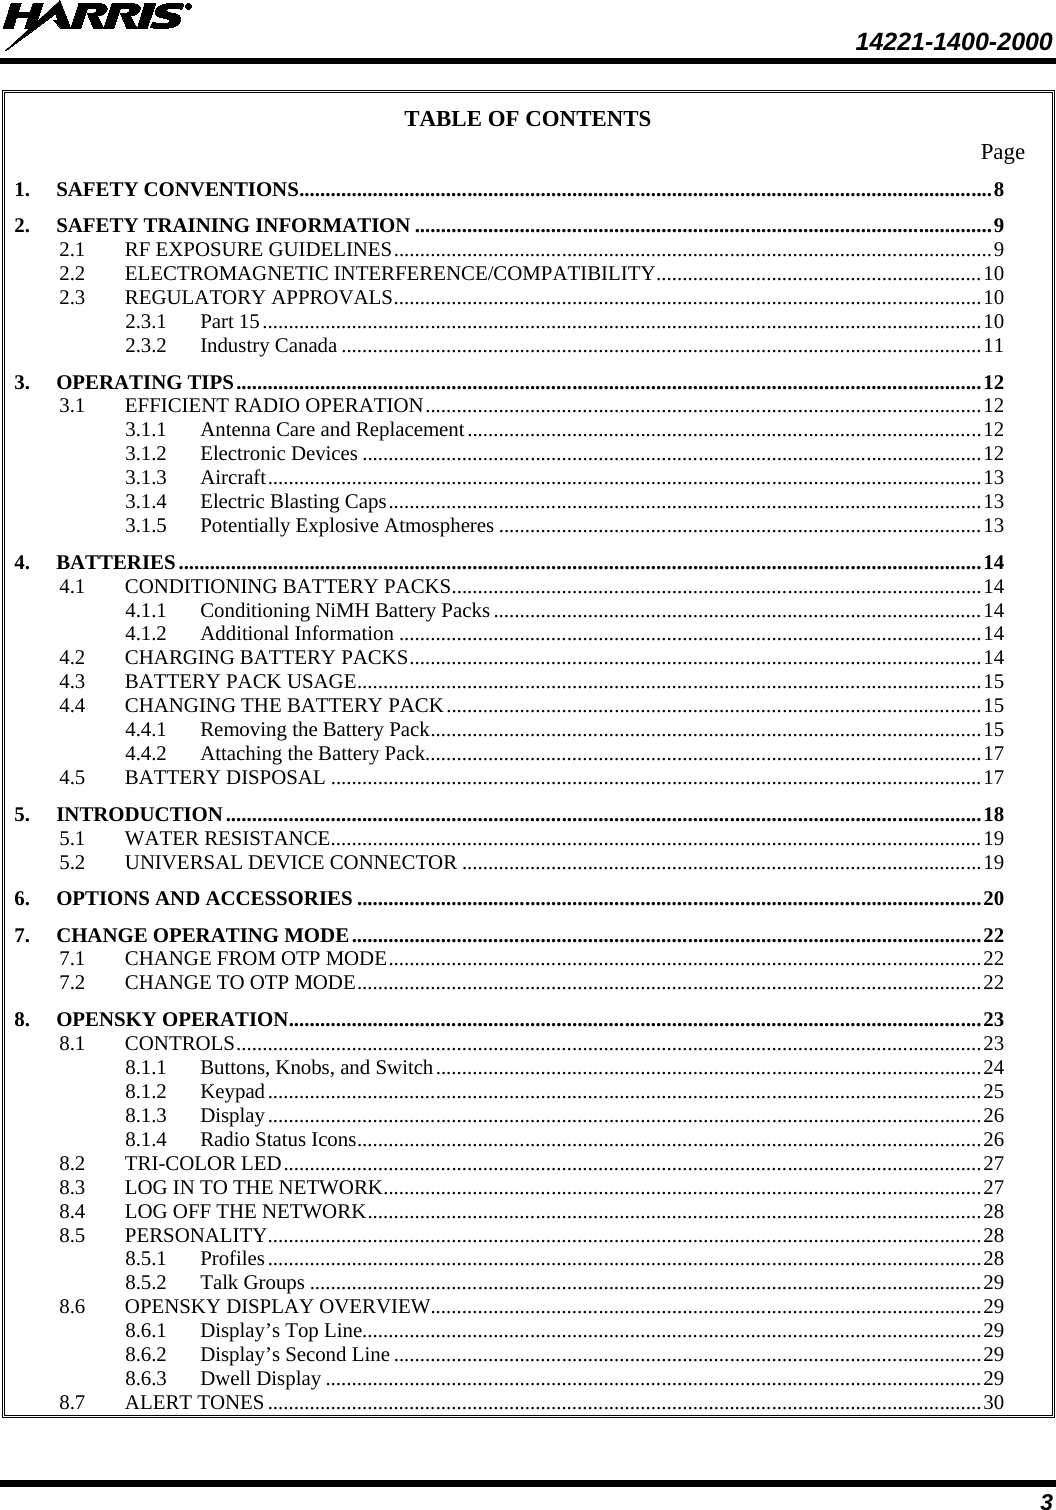  14221-1400-2000  3 TABLE OF CONTENTS Page 1. SAFETY CONVENTIONS .................................................................................................................................... 8 2. SAFETY TRAINING INFORMATION .............................................................................................................. 9 2.1 RF EXPOSURE GUIDELINES .................................................................................................................. 9 2.2 ELECTROMAGNETIC INTERFERENCE/COMPATIBILITY .............................................................. 10 2.3 REGULATORY APPROVALS ................................................................................................................ 10 2.3.1 Part 15 ......................................................................................................................................... 10 2.3.2 Industry Canada .......................................................................................................................... 11 3. OPERATING TIPS .............................................................................................................................................. 12 3.1 EFFICIENT RADIO OPERATION .......................................................................................................... 12 3.1.1 Antenna Care and Replacement .................................................................................................. 12 3.1.2 Electronic Devices ...................................................................................................................... 12 3.1.3 Aircraft ........................................................................................................................................ 13 3.1.4 Electric Blasting Caps ................................................................................................................. 13 3.1.5 Potentially Explosive Atmospheres ............................................................................................ 13 4. BATTERIES ......................................................................................................................................................... 14 4.1 CONDITIONING BATTERY PACKS ..................................................................................................... 14 4.1.1 Conditioning NiMH Battery Packs ............................................................................................. 14 4.1.2 Additional Information ............................................................................................................... 14 4.2 CHARGING BATTERY PACKS ............................................................................................................. 14 4.3 BATTERY PACK USAGE ....................................................................................................................... 15 4.4 CHANGING THE BATTERY PACK ...................................................................................................... 15 4.4.1 Removing the Battery Pack ......................................................................................................... 15 4.4.2 Attaching the Battery Pack.......................................................................................................... 17 4.5 BATTERY DISPOSAL ............................................................................................................................ 17 5. INTRODUCTION ................................................................................................................................................ 18 5.1 WATER RESISTANCE ............................................................................................................................ 19 5.2 UNIVERSAL DEVICE CONNECTOR ................................................................................................... 19 6. OPTIONS AND ACCESSORIES ....................................................................................................................... 20 7. CHANGE OPERATING MODE ........................................................................................................................ 22 7.1 CHANGE FROM OTP MODE ................................................................................................................. 22 7.2 CHANGE TO OTP MODE ....................................................................................................................... 22 8. OPENSKY OPERATION .................................................................................................................................... 23 8.1 CONTROLS .............................................................................................................................................. 23 8.1.1 Buttons, Knobs, and Switch ........................................................................................................ 24 8.1.2 Keypad ........................................................................................................................................ 25 8.1.3 Display ........................................................................................................................................ 26 8.1.4 Radio Status Icons ....................................................................................................................... 26 8.2 TRI-COLOR LED ..................................................................................................................................... 27 8.3 LOG IN TO THE NETWORK .................................................................................................................. 27 8.4 LOG OFF THE NETWORK ..................................................................................................................... 28 8.5 PERSONALITY ........................................................................................................................................ 28 8.5.1 Profiles ........................................................................................................................................ 28 8.5.2 Talk Groups ................................................................................................................................ 29 8.6 OPENSKY DISPLAY OVERVIEW ......................................................................................................... 29 8.6.1 Display’s Top Line...................................................................................................................... 29 8.6.2 Display’s Second Line ................................................................................................................ 29 8.6.3 Dwell Display ............................................................................................................................. 29 8.7 ALERT TONES ........................................................................................................................................ 30 